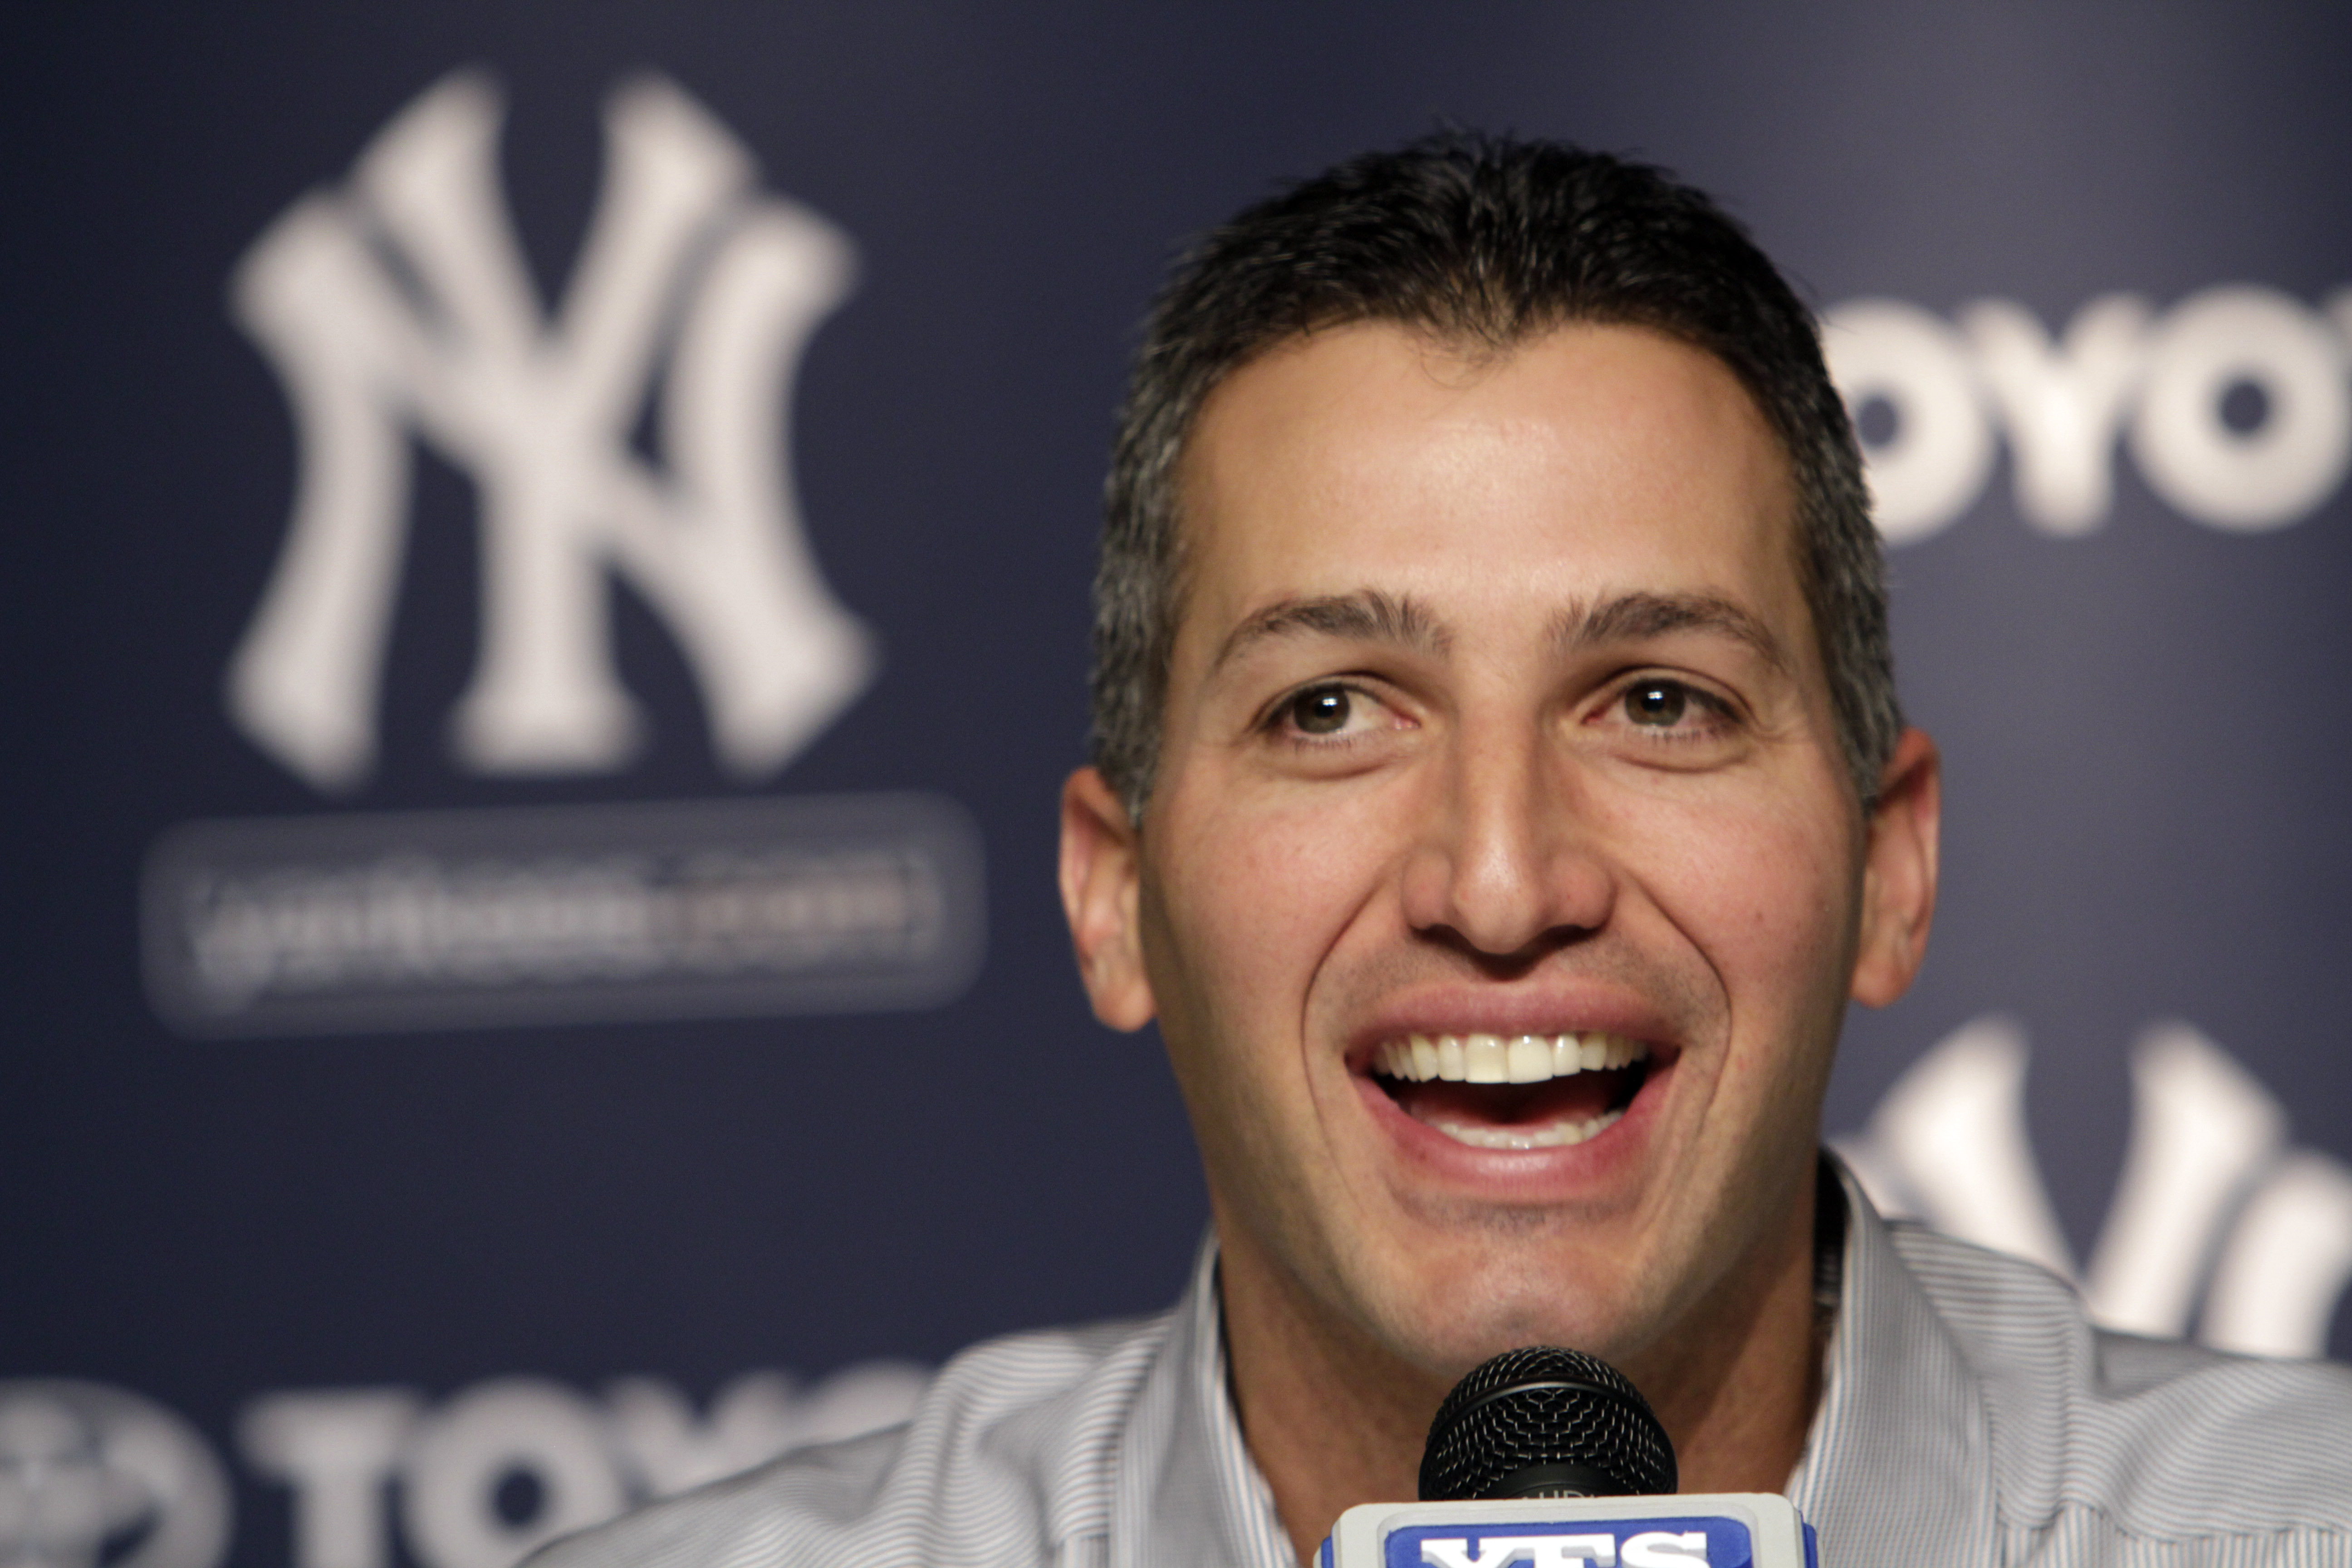 What Yankees said about Andy Pettitte joining team as advisor 